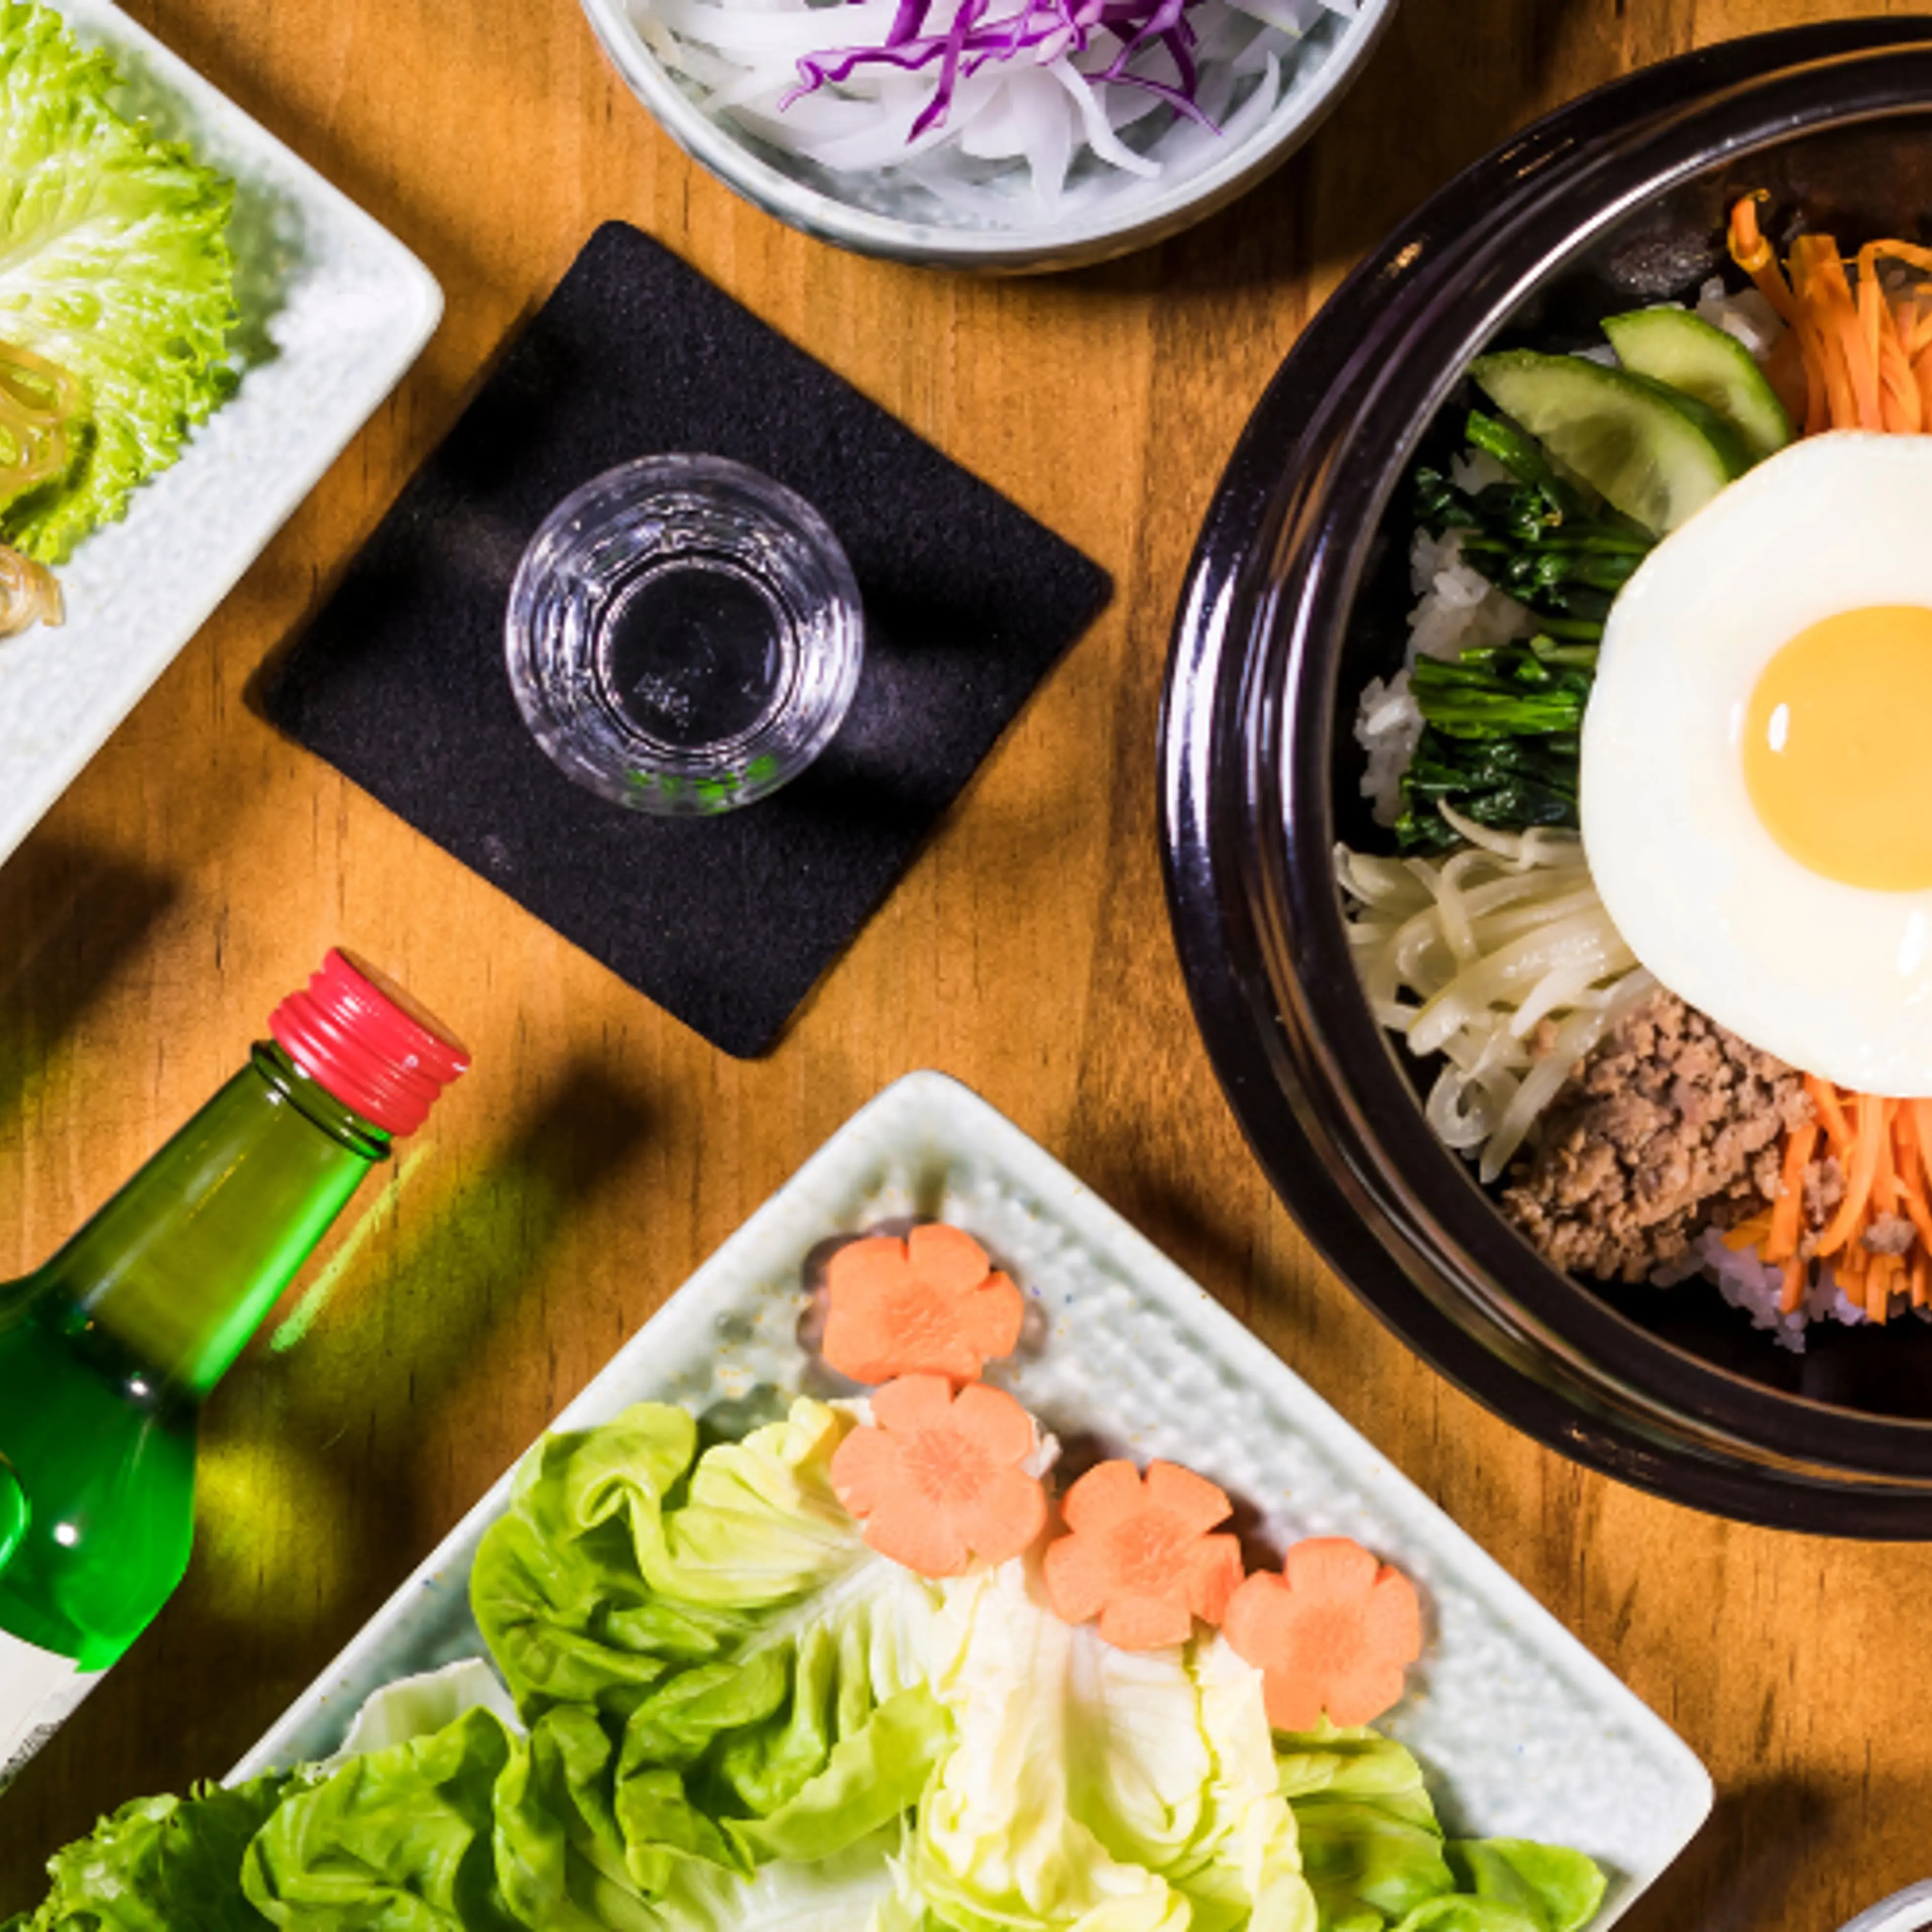 How the rise in Korean culture is accelerating the growth of the K-food trend in India

